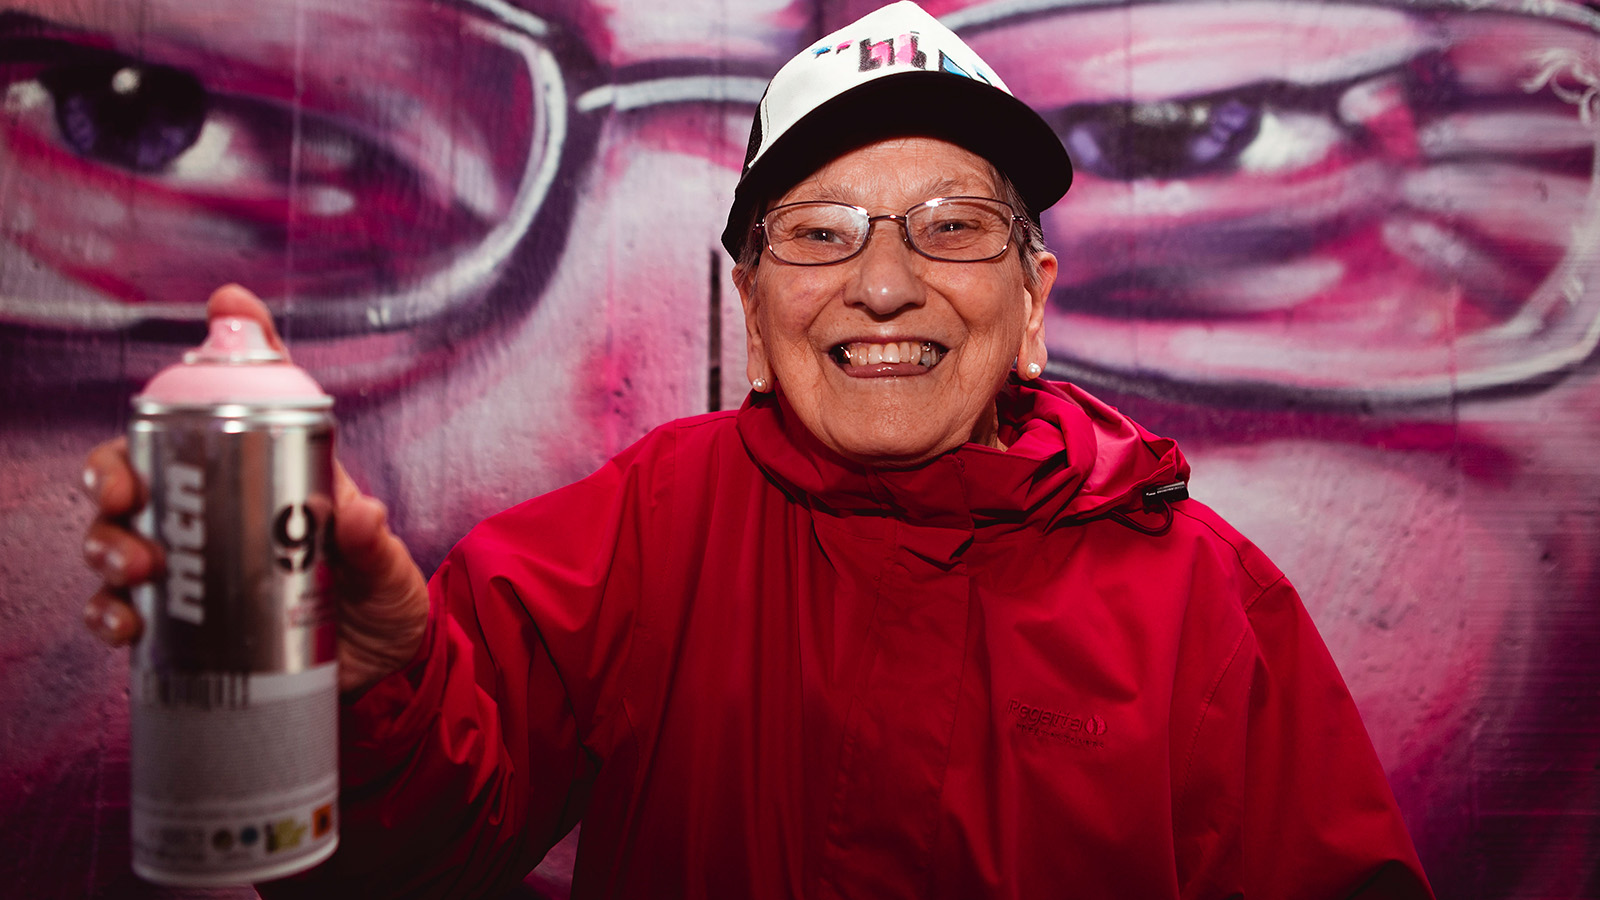 Older woman in bright red jacket smiles as she holds a can of spraypaint aimed at the camera. Behind her is a mural of a woman wearing glasses